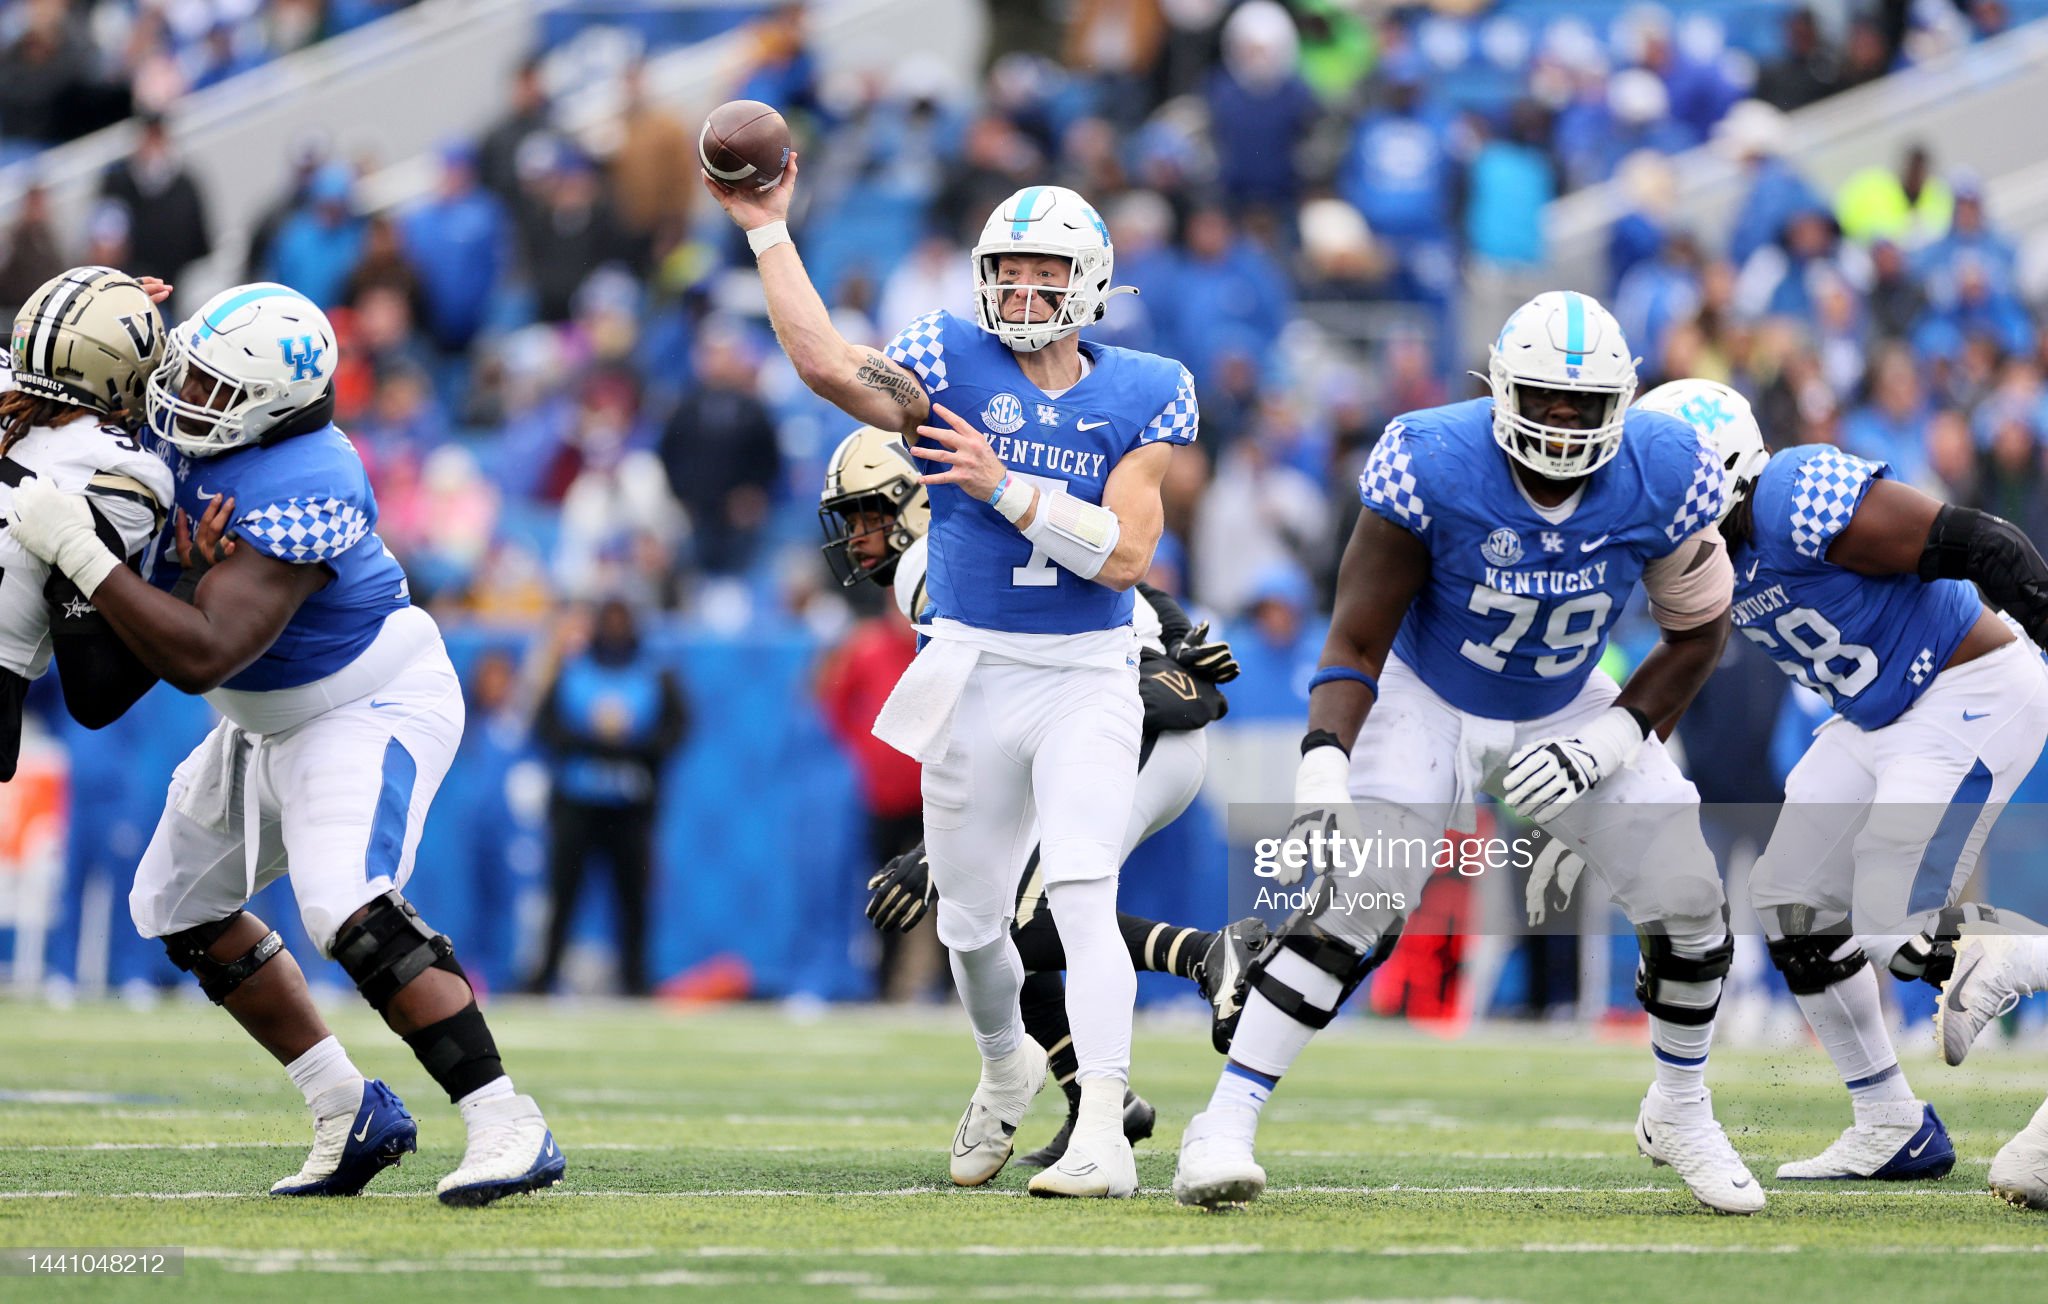 2023 NFL Draft Scouting Reports: QB Will Levis, Kentucky